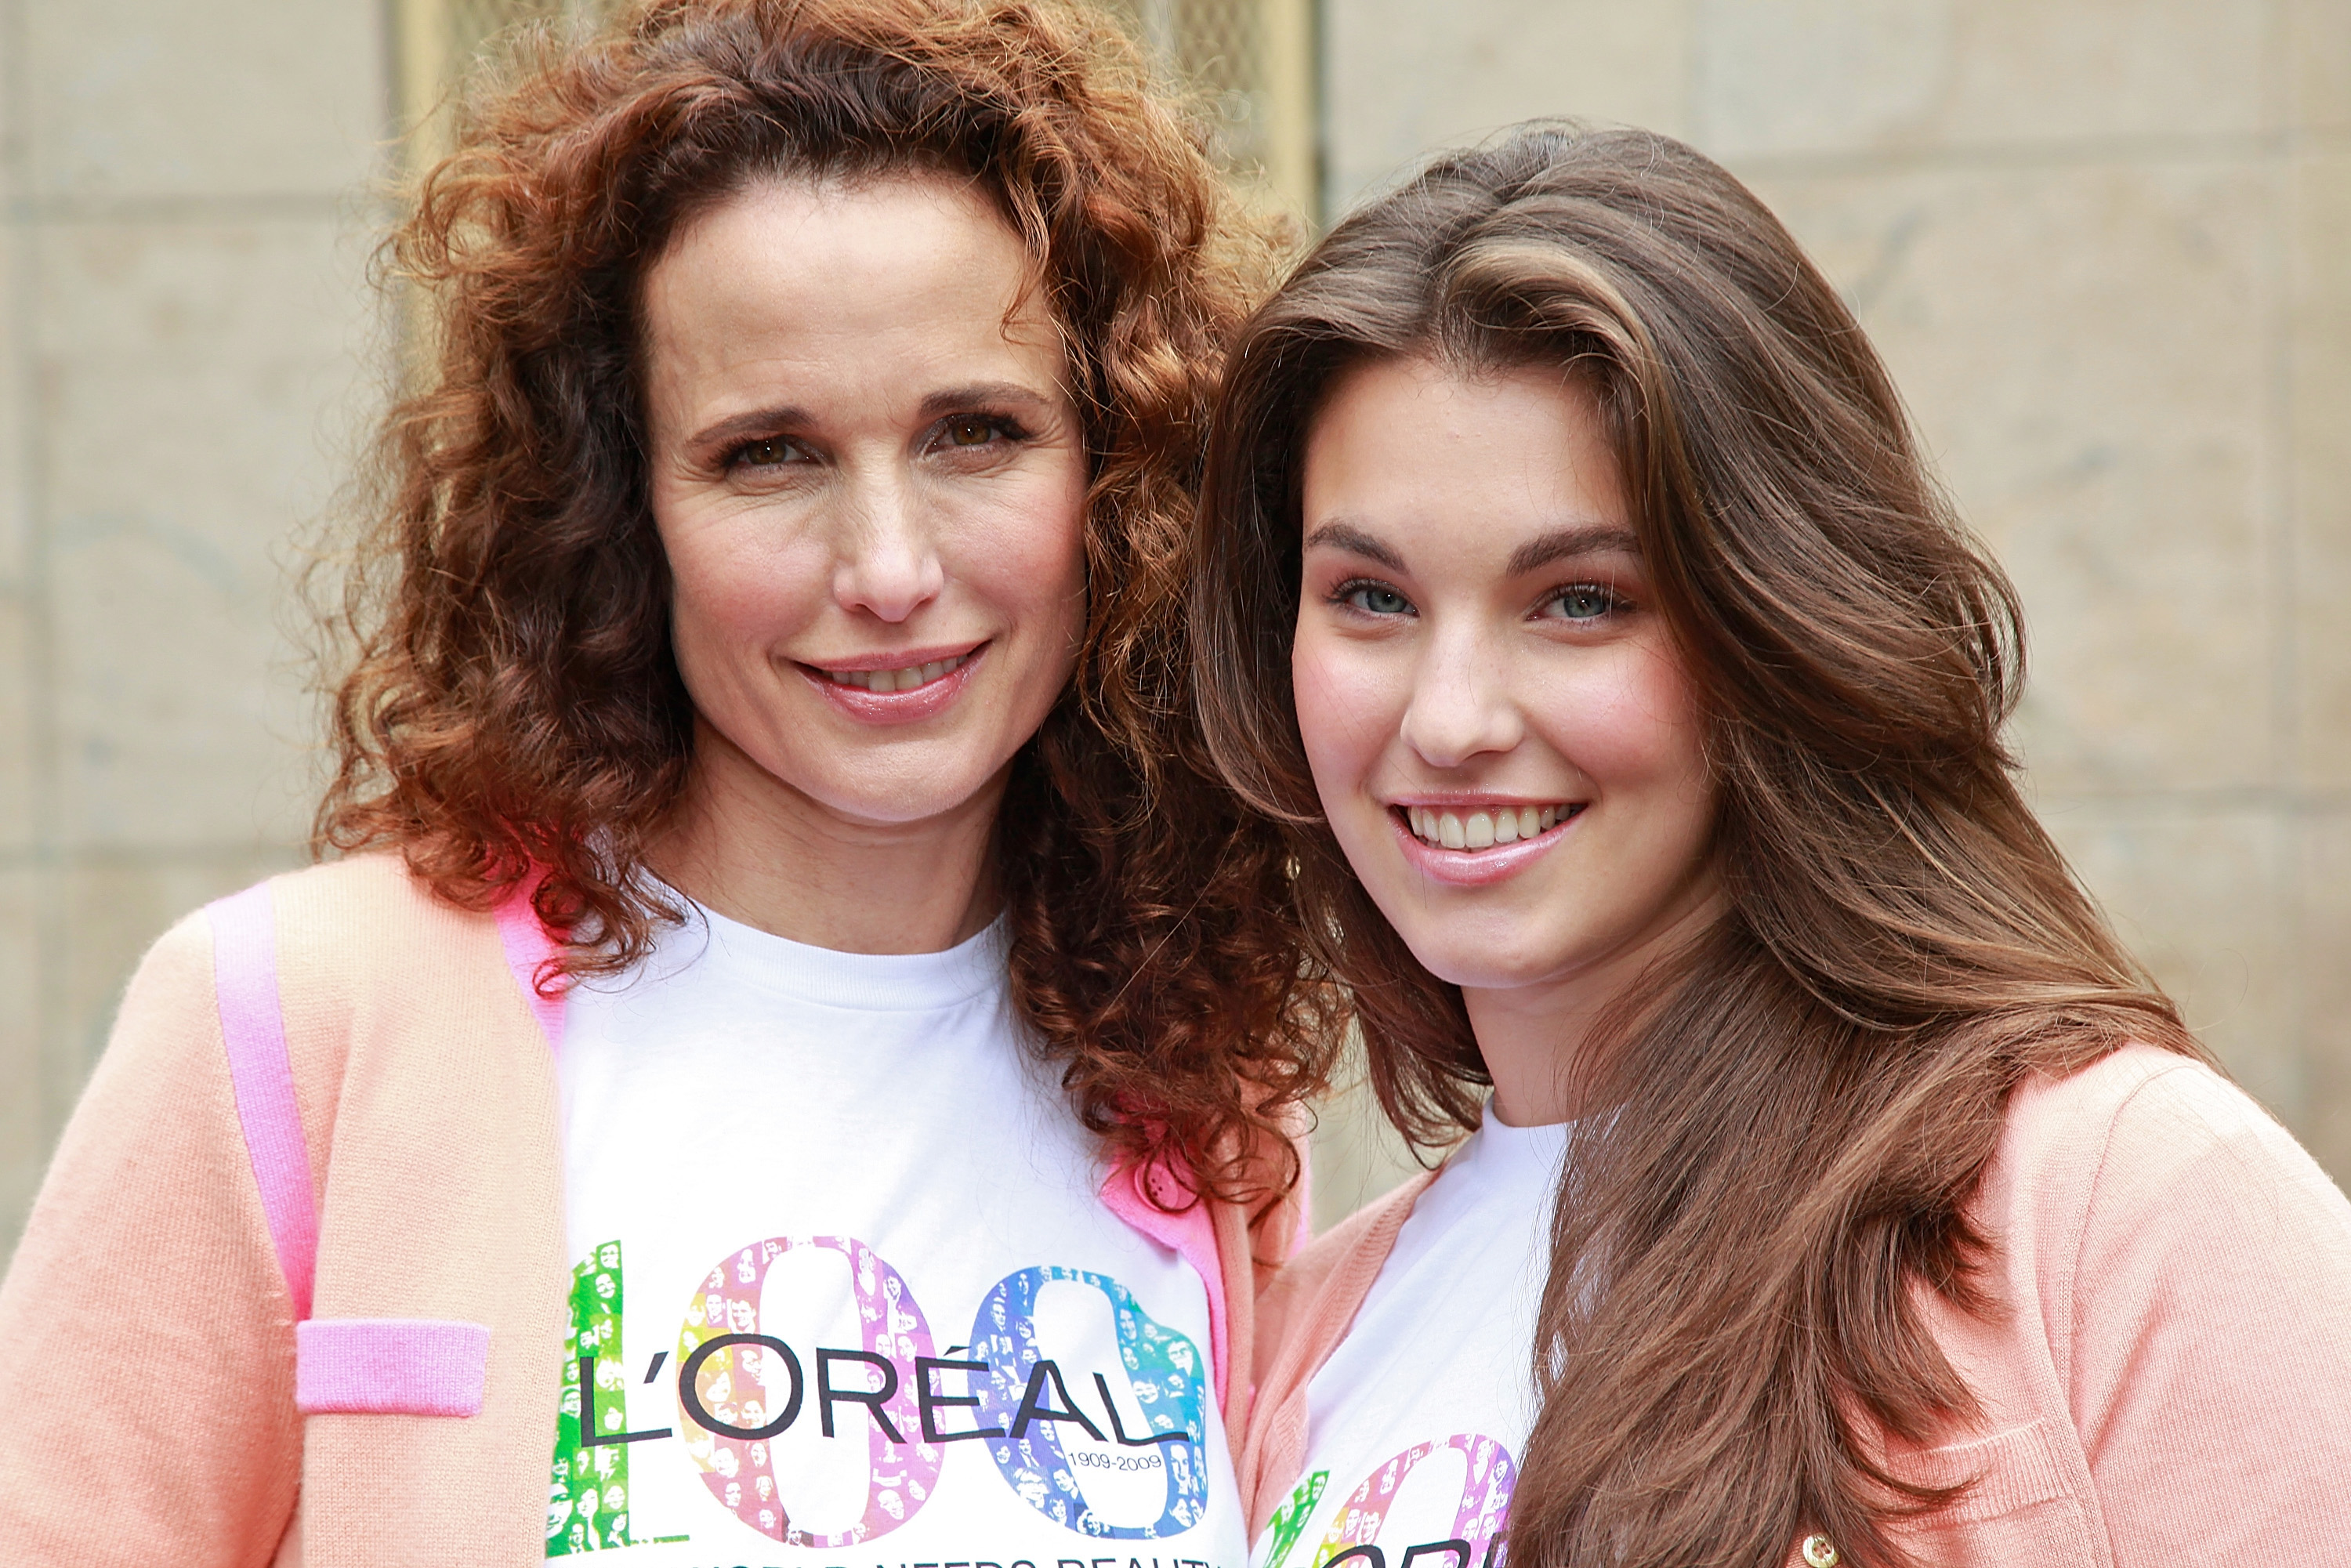 Andie MacDowell and her daughter Rainey Qualley at the L'Oreal Centennial Volunteer Day on June 4, 2009, in New York City | Source: Getty Images